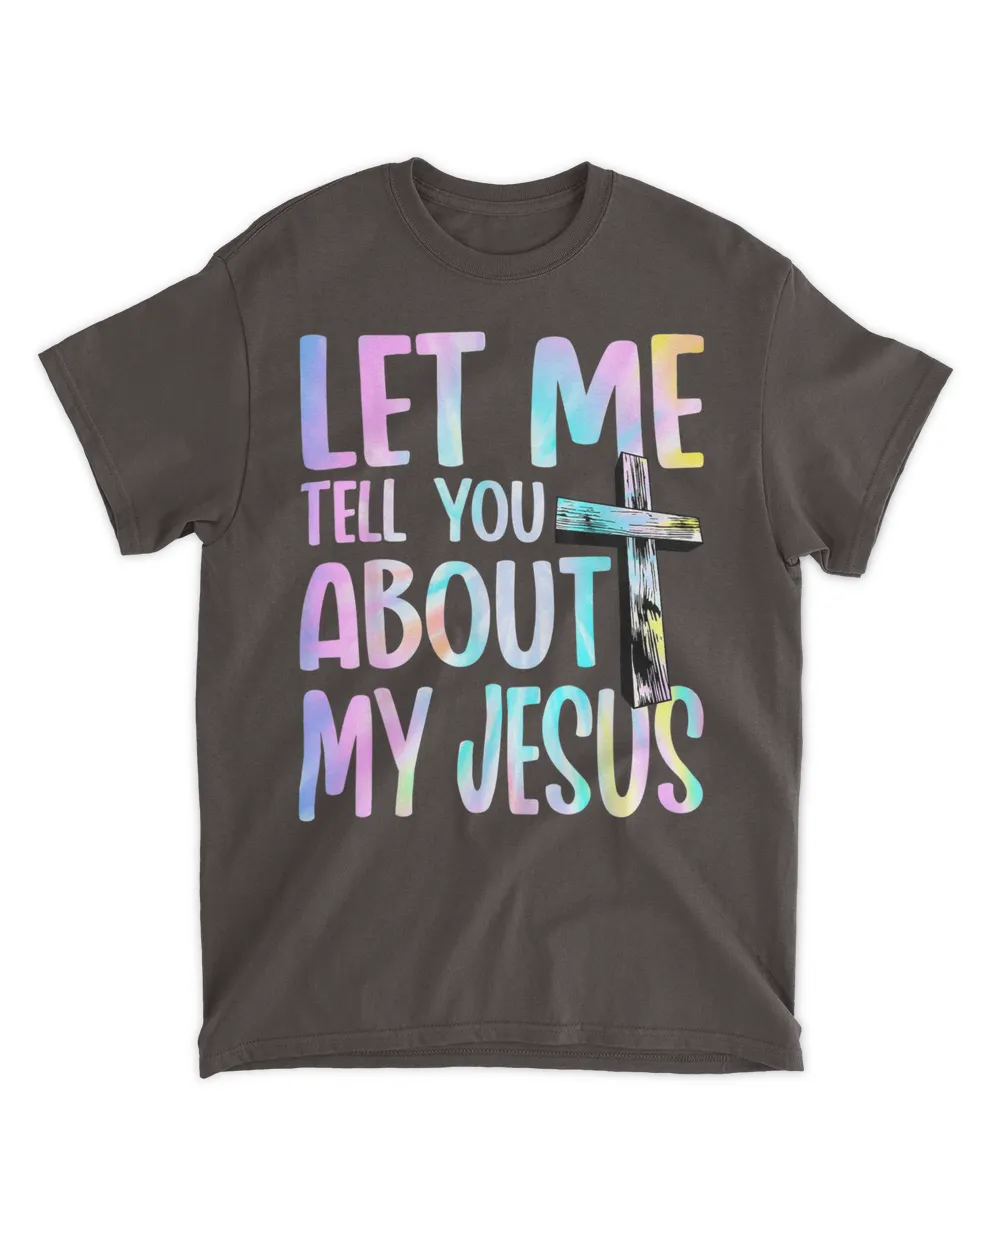 got-mcw-294 Let Me Tell You About My Jesus